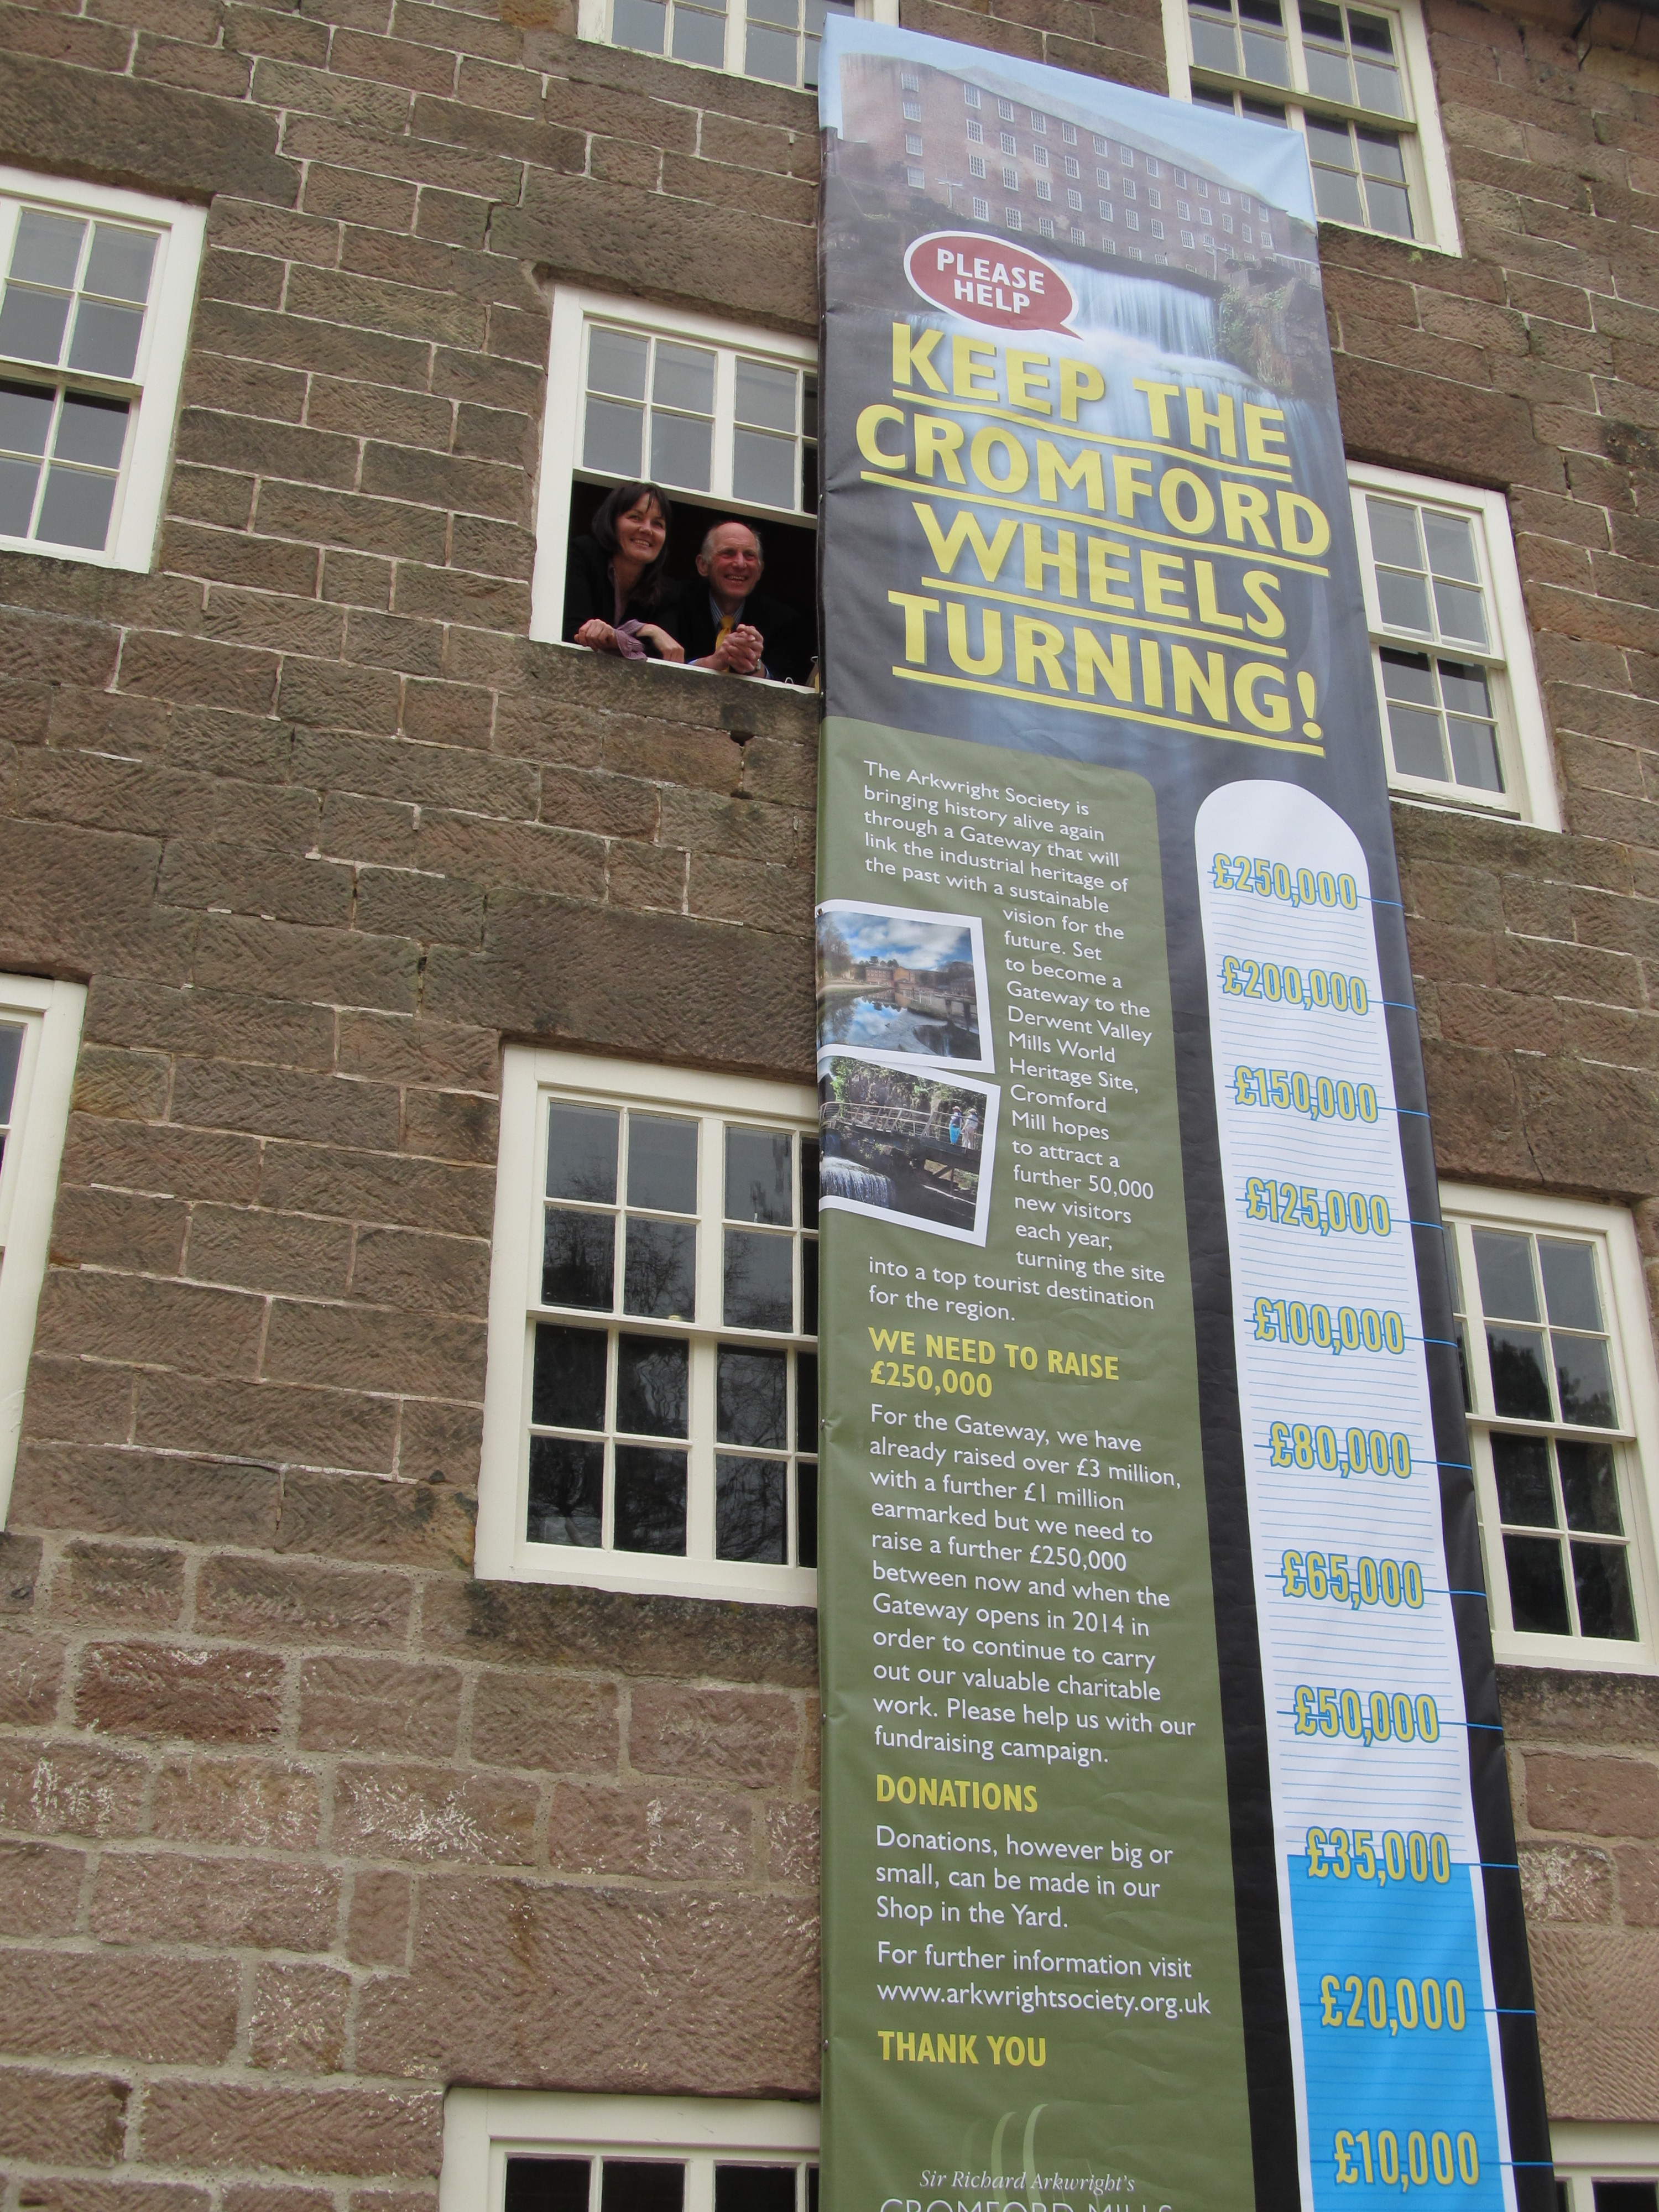 Funding campaign launch for new Visitor Centre at Cromford Mills